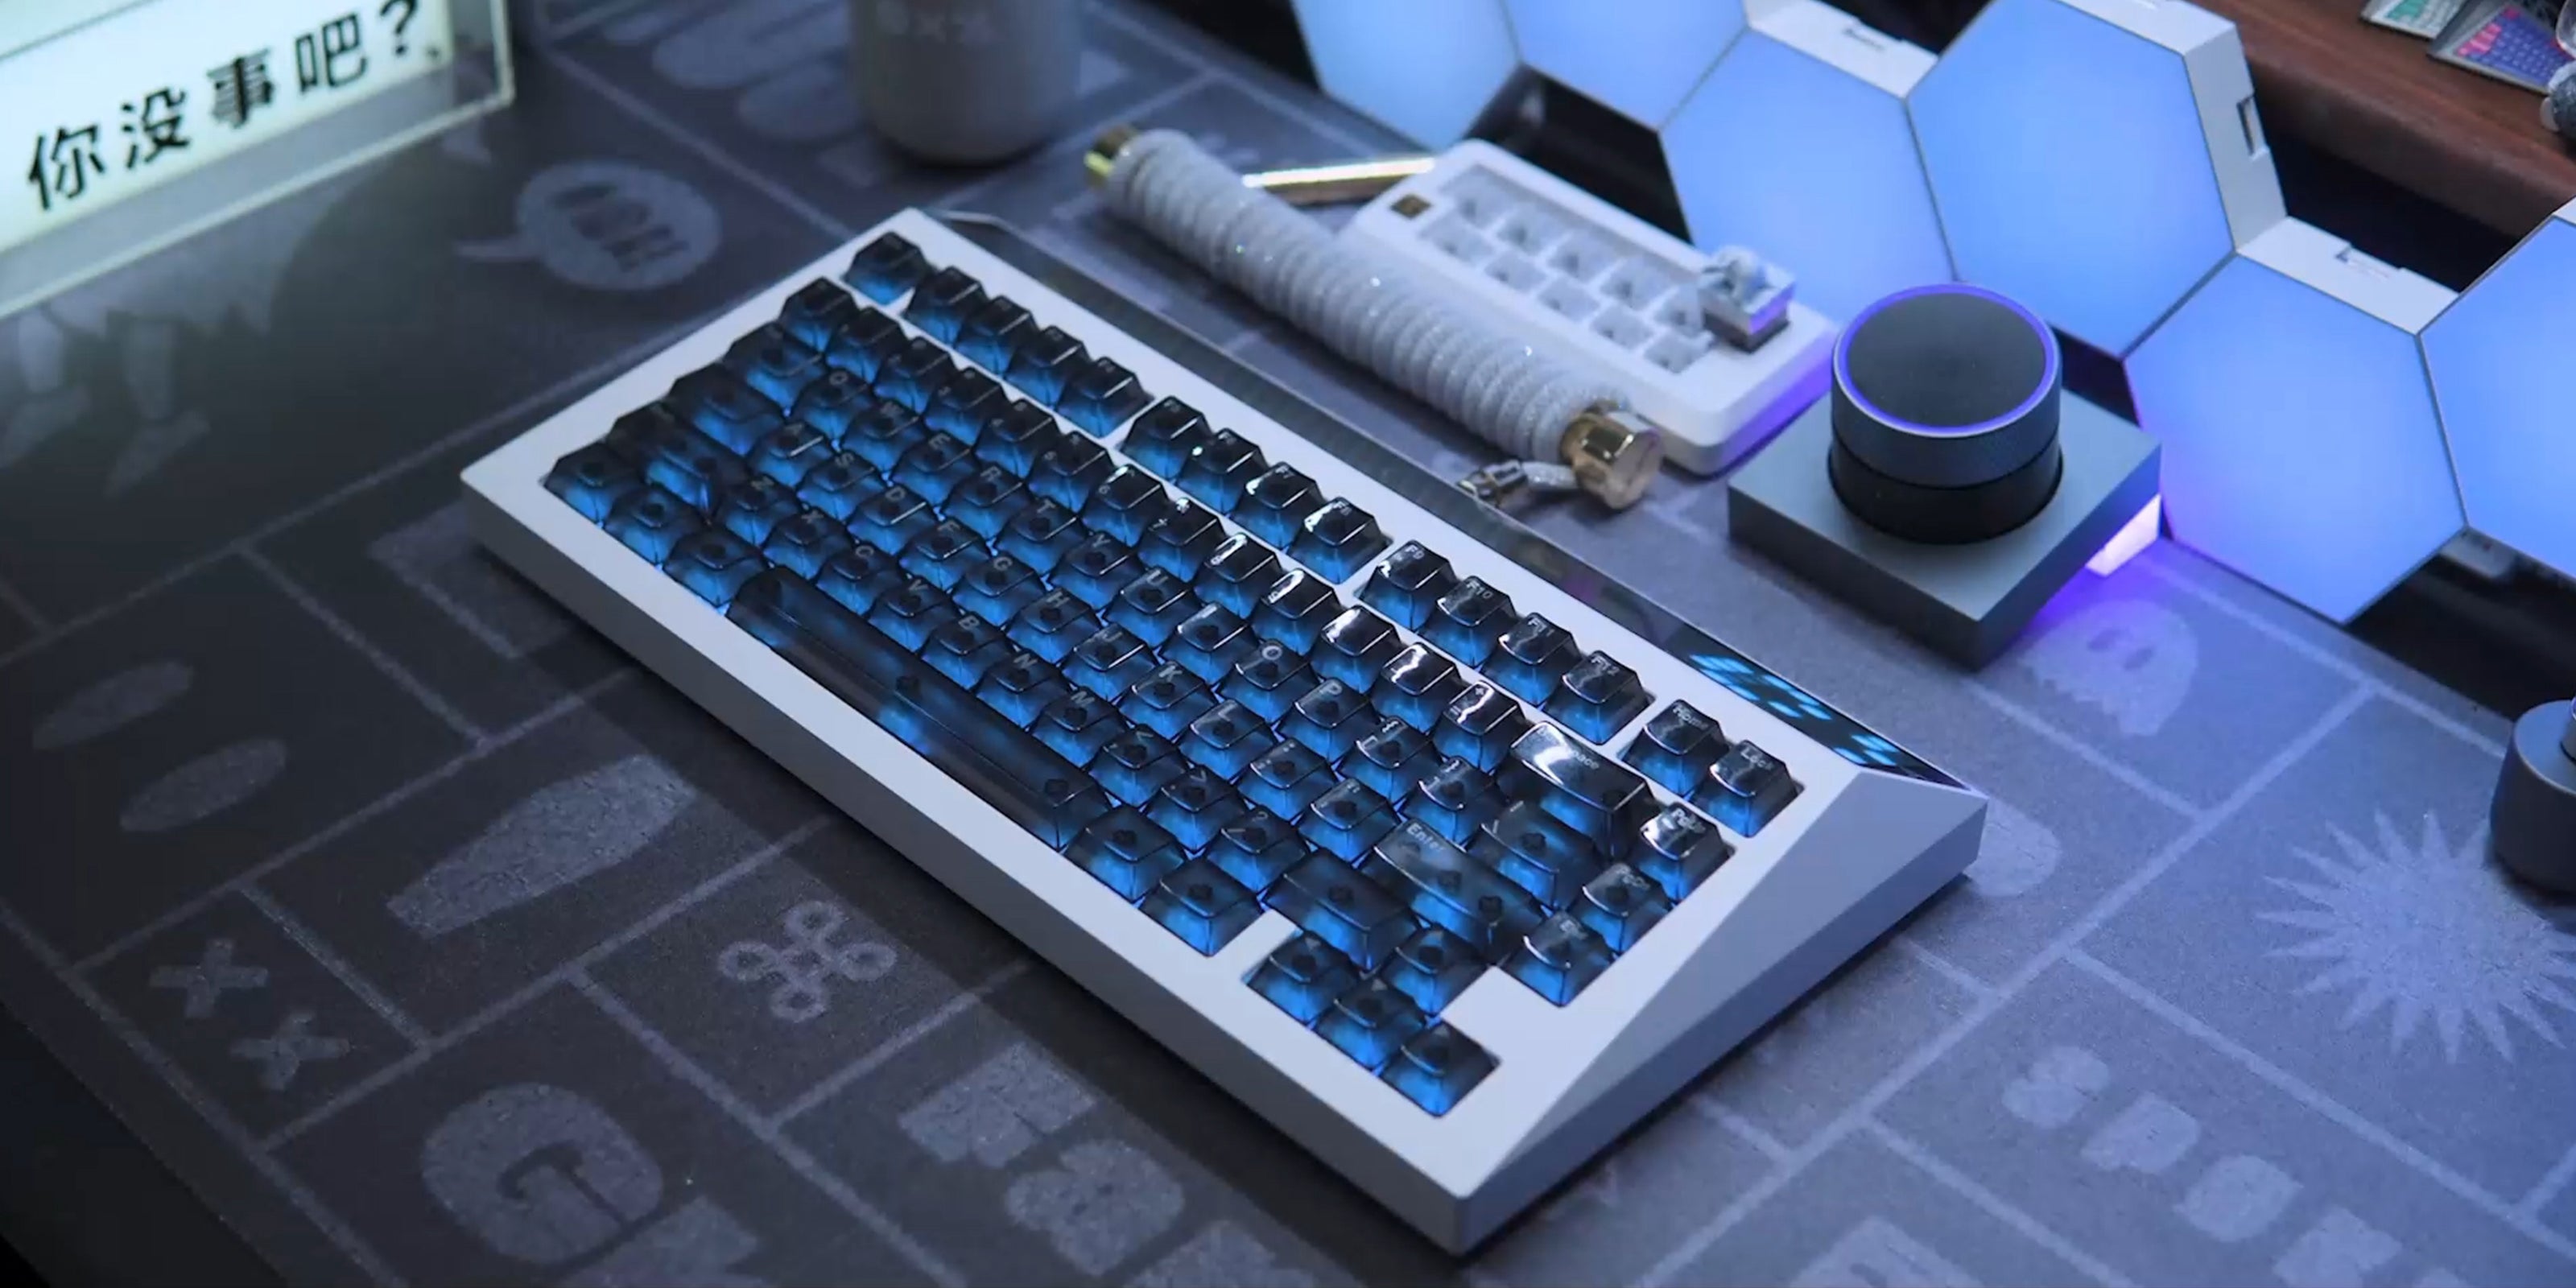 Angry Miao CYBERBOARD R4 RGB Icy Silver Pro Switch Mechanical Keyboard -  Cloud W